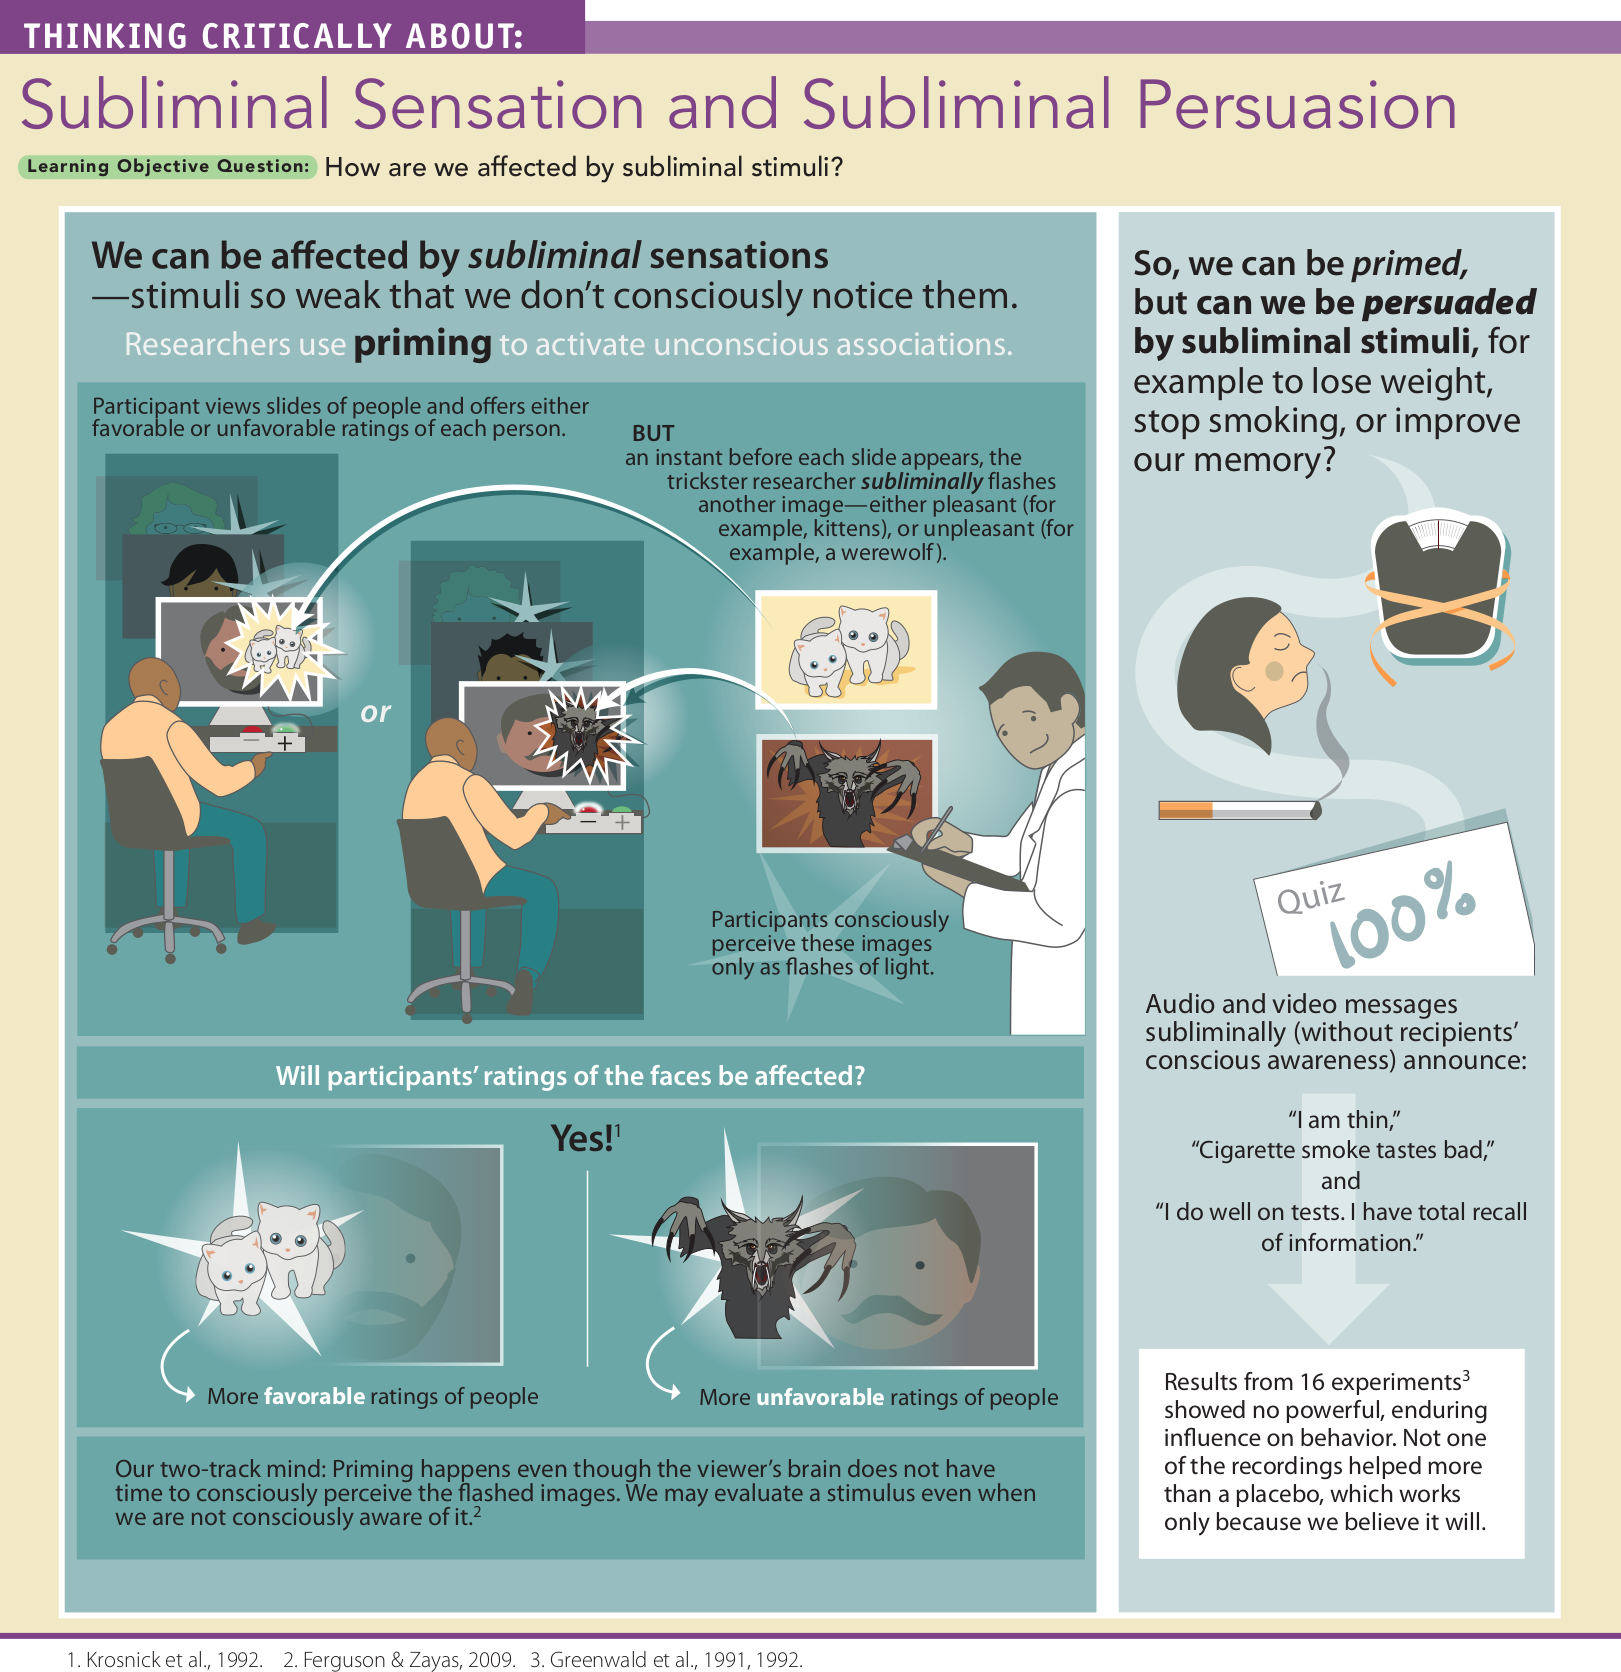 An illustration shows detailed description on subliminal sensation and subliminal persuasion. You can read full description from the link below